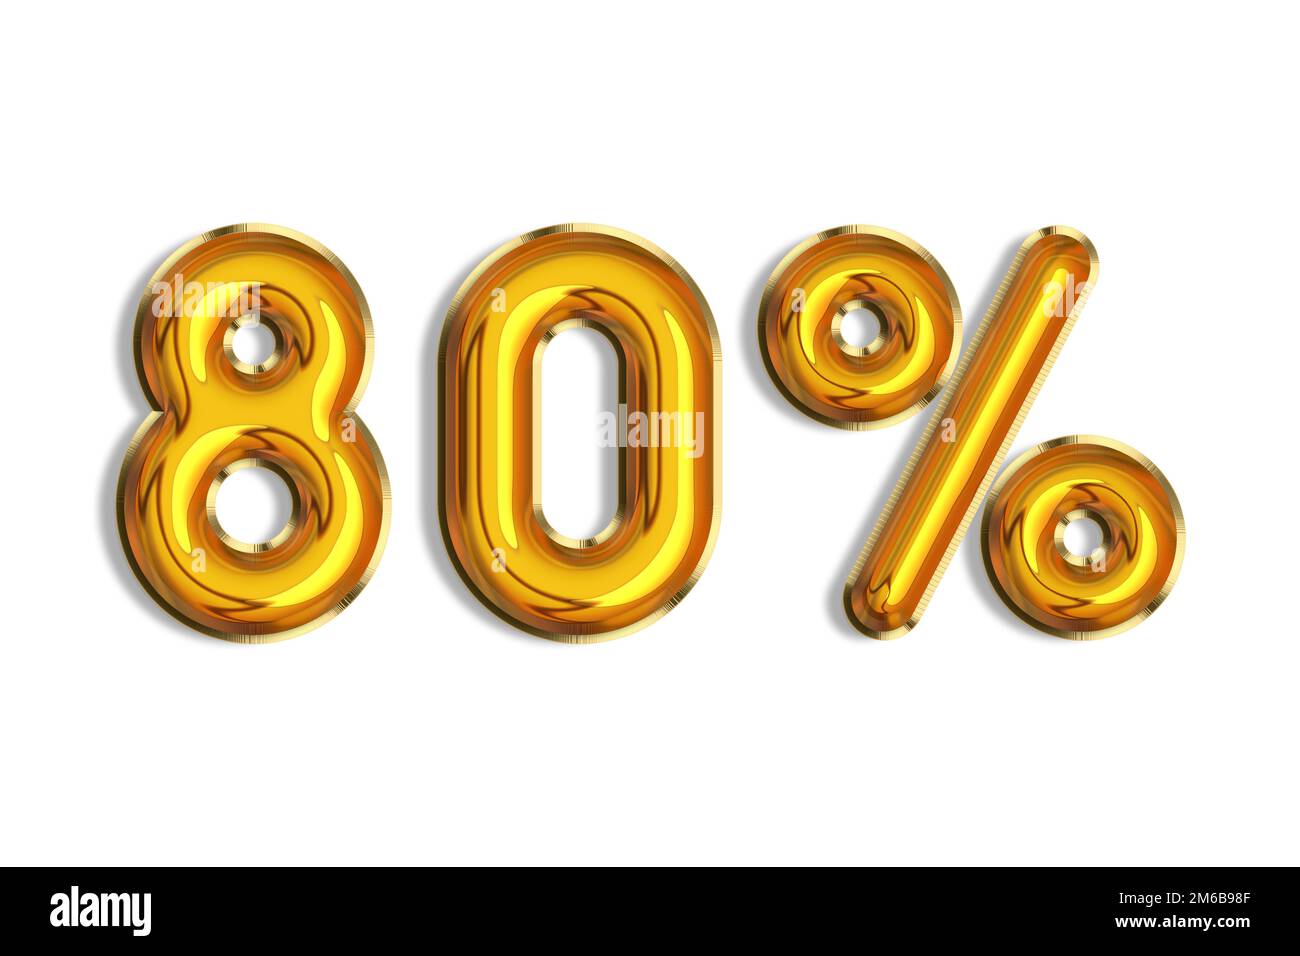 80% off discount promotion sale made of realistic 3d gold helium balloons. Illustration of golden percent symbol for selling poster, banner, ads, shop Stock Photo